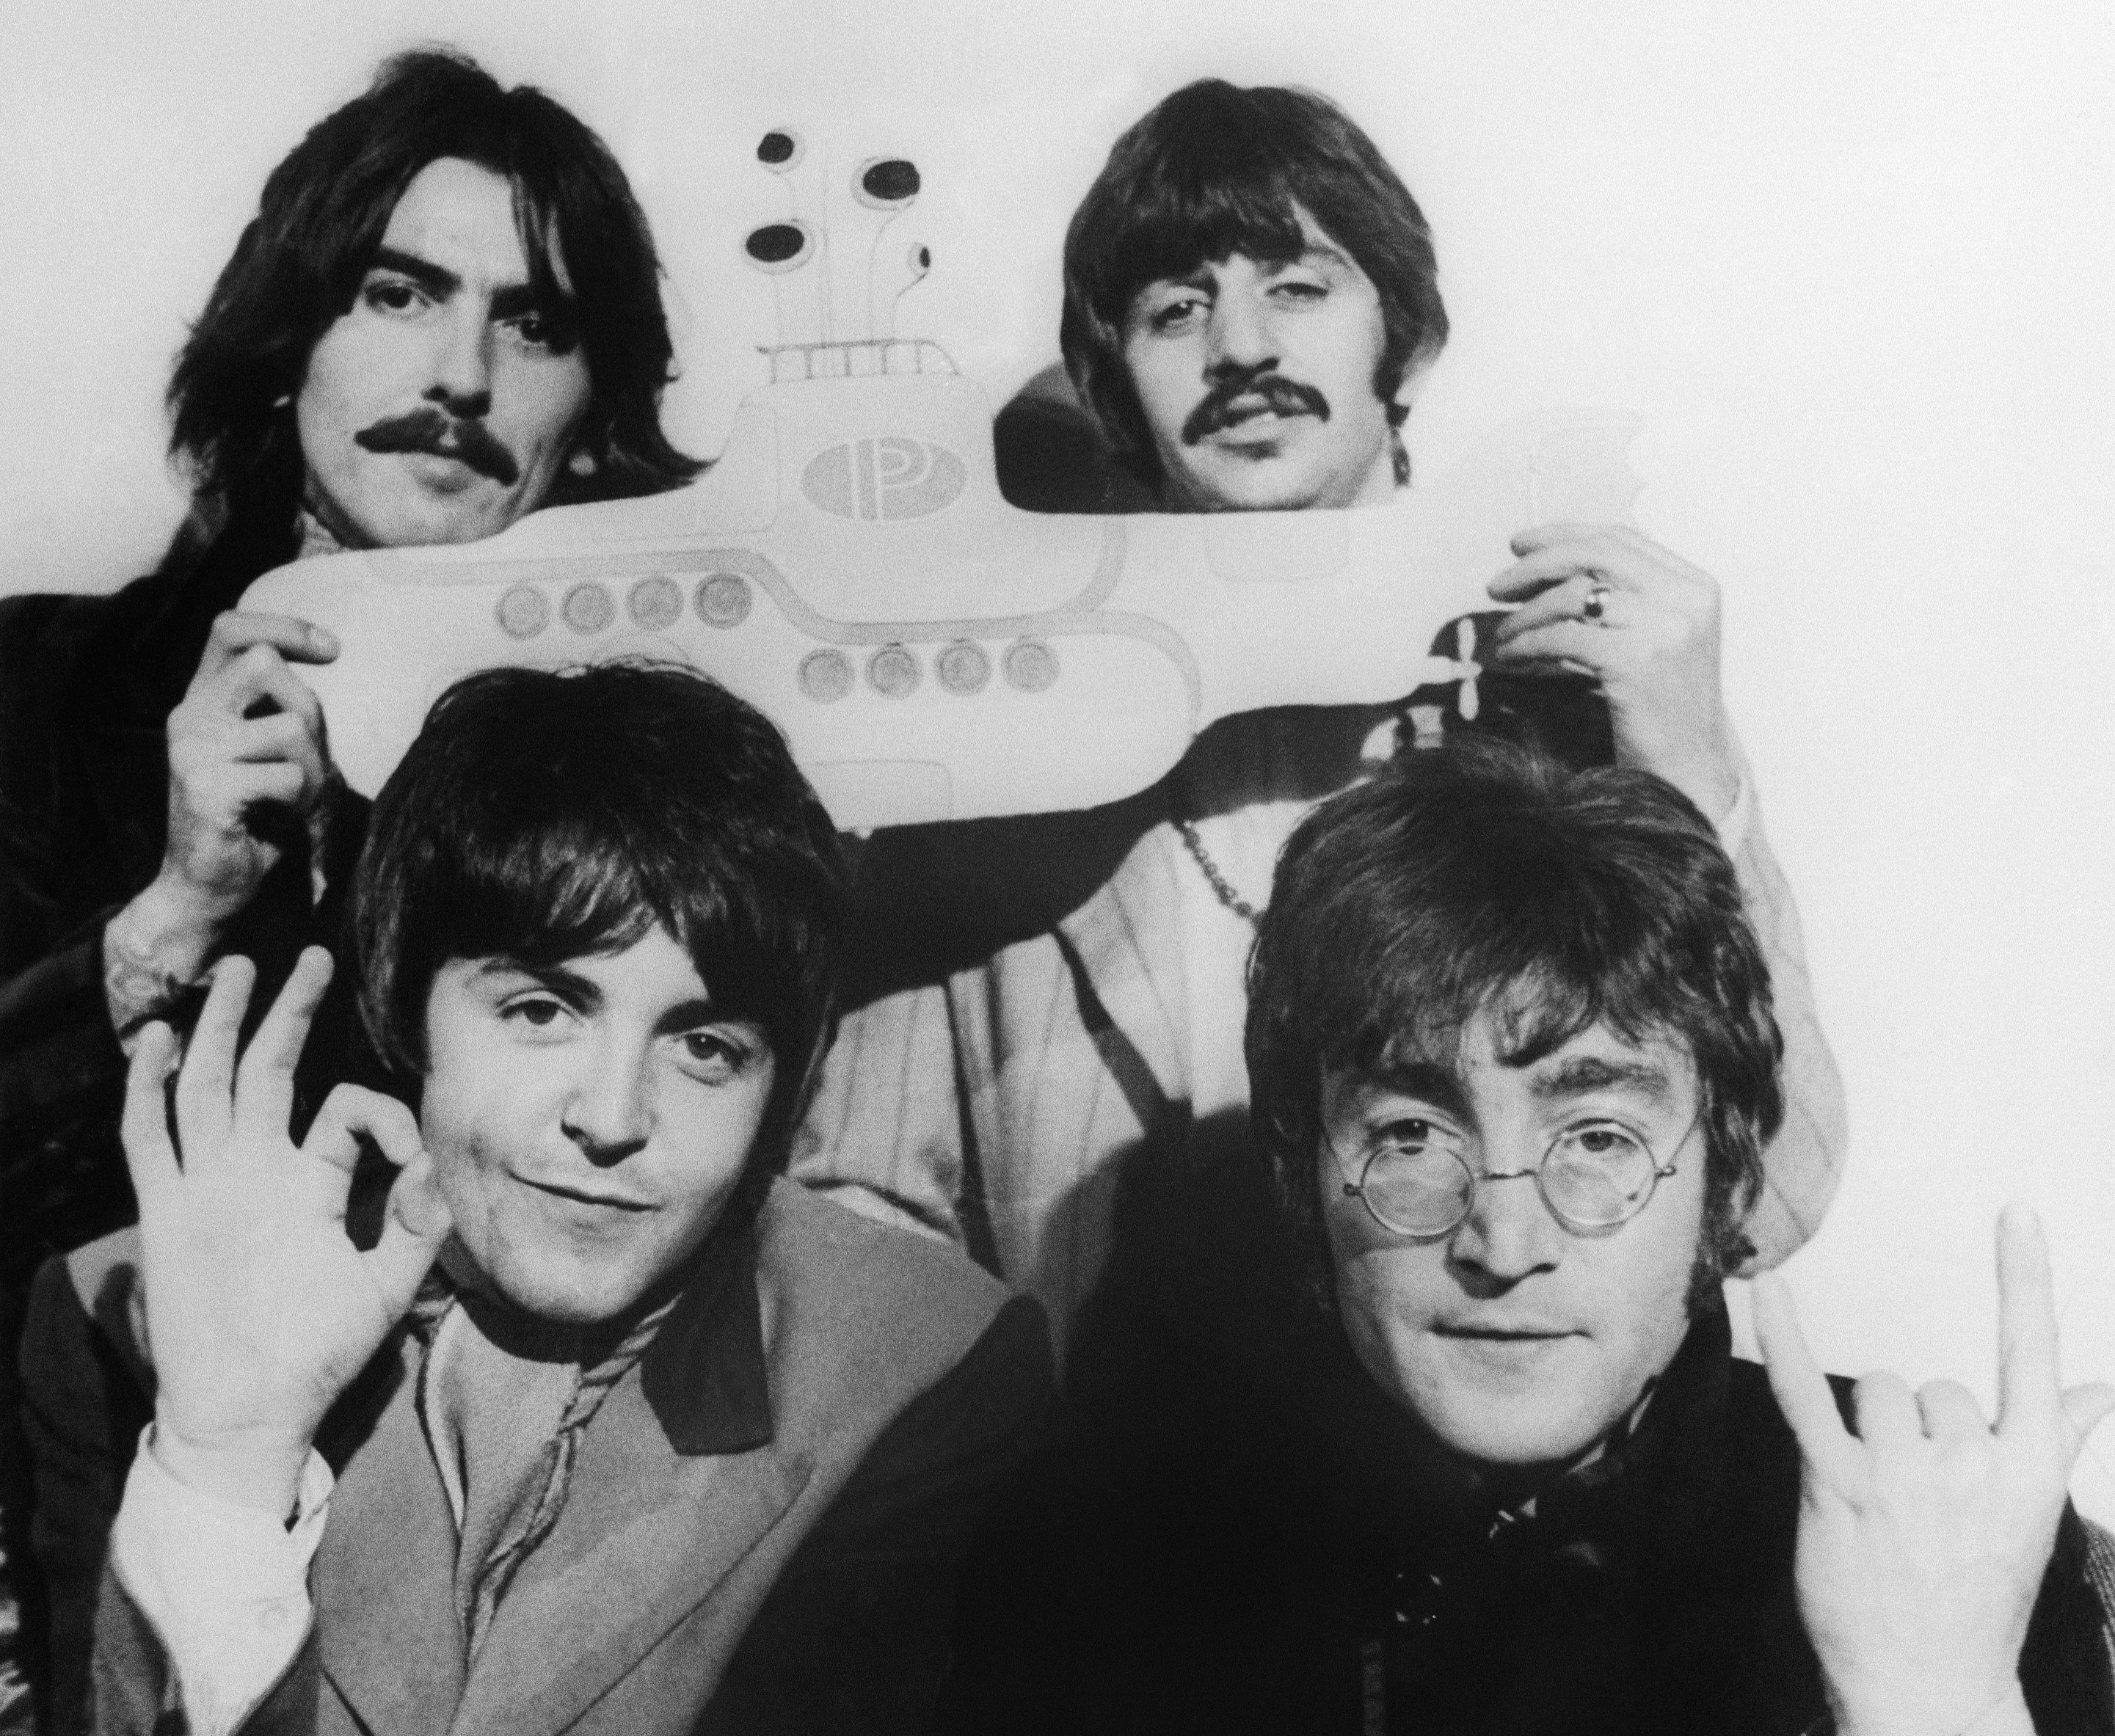 A black and white picture of The Beatles posing together. George Harrison and Ringo Starr hold a yellow submarine.